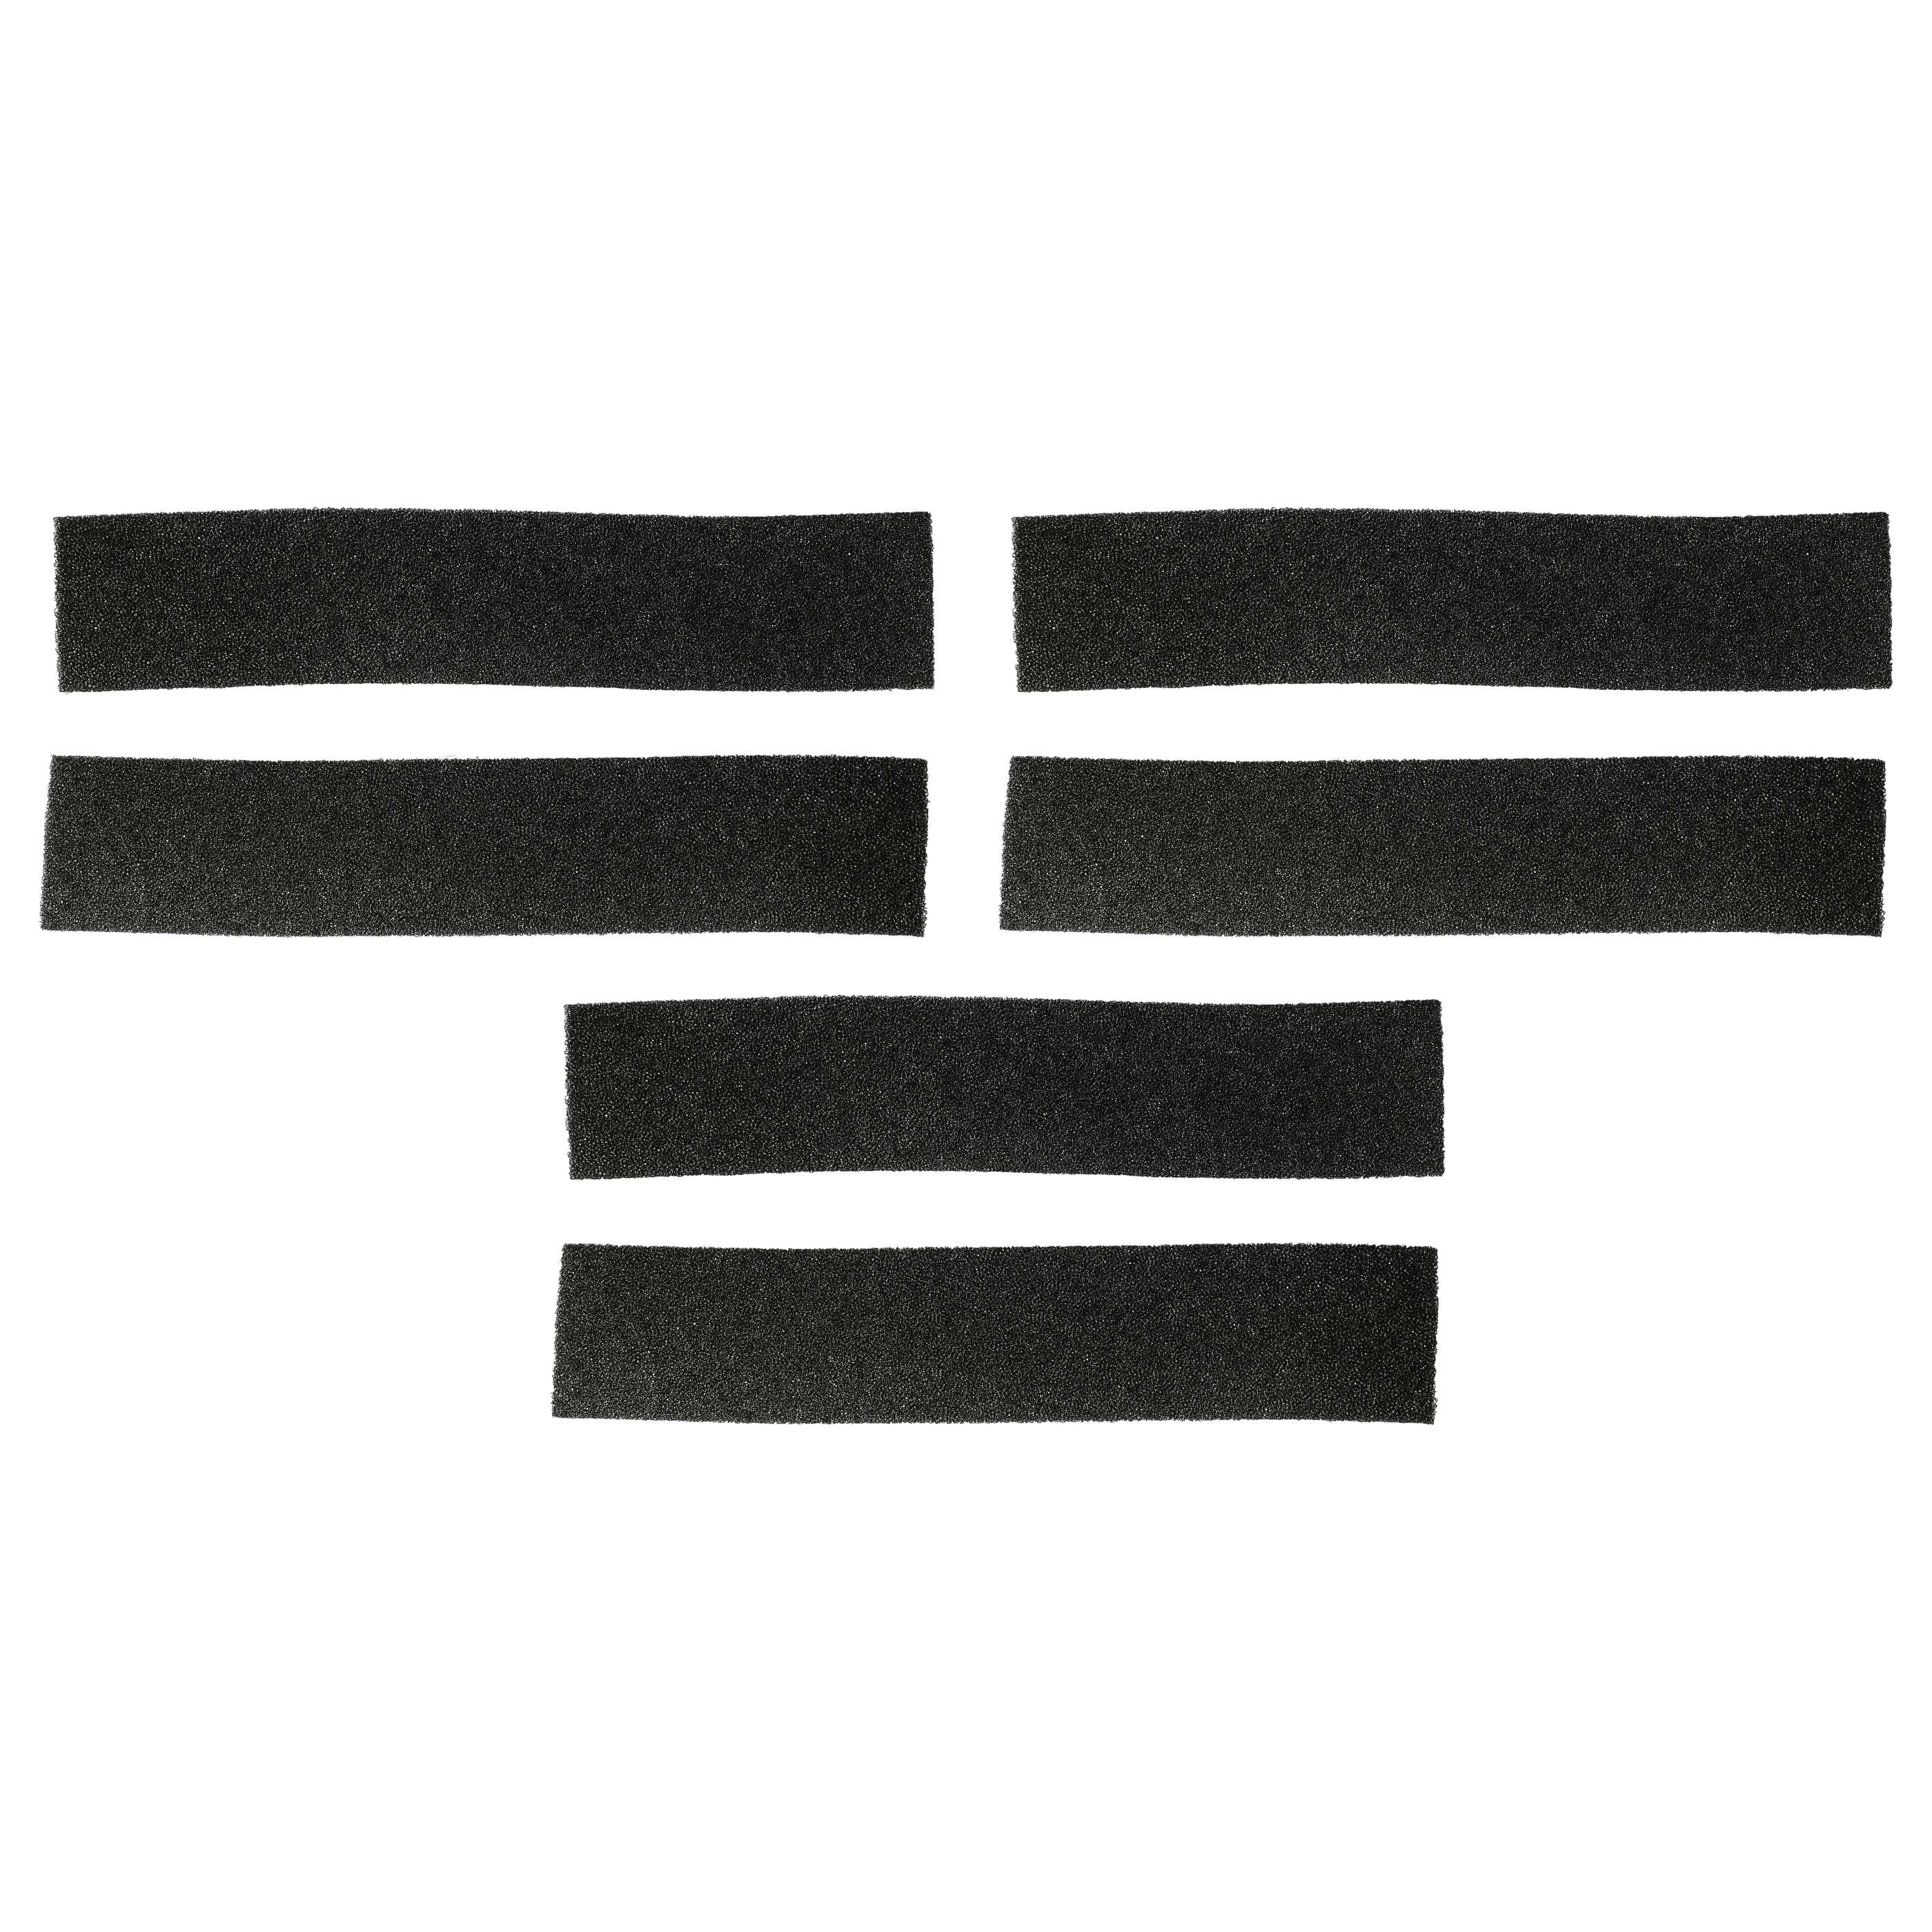 6x Filter for Filling Ring as Replacement for Miele 9688381, 9688380 Tumble Dryer